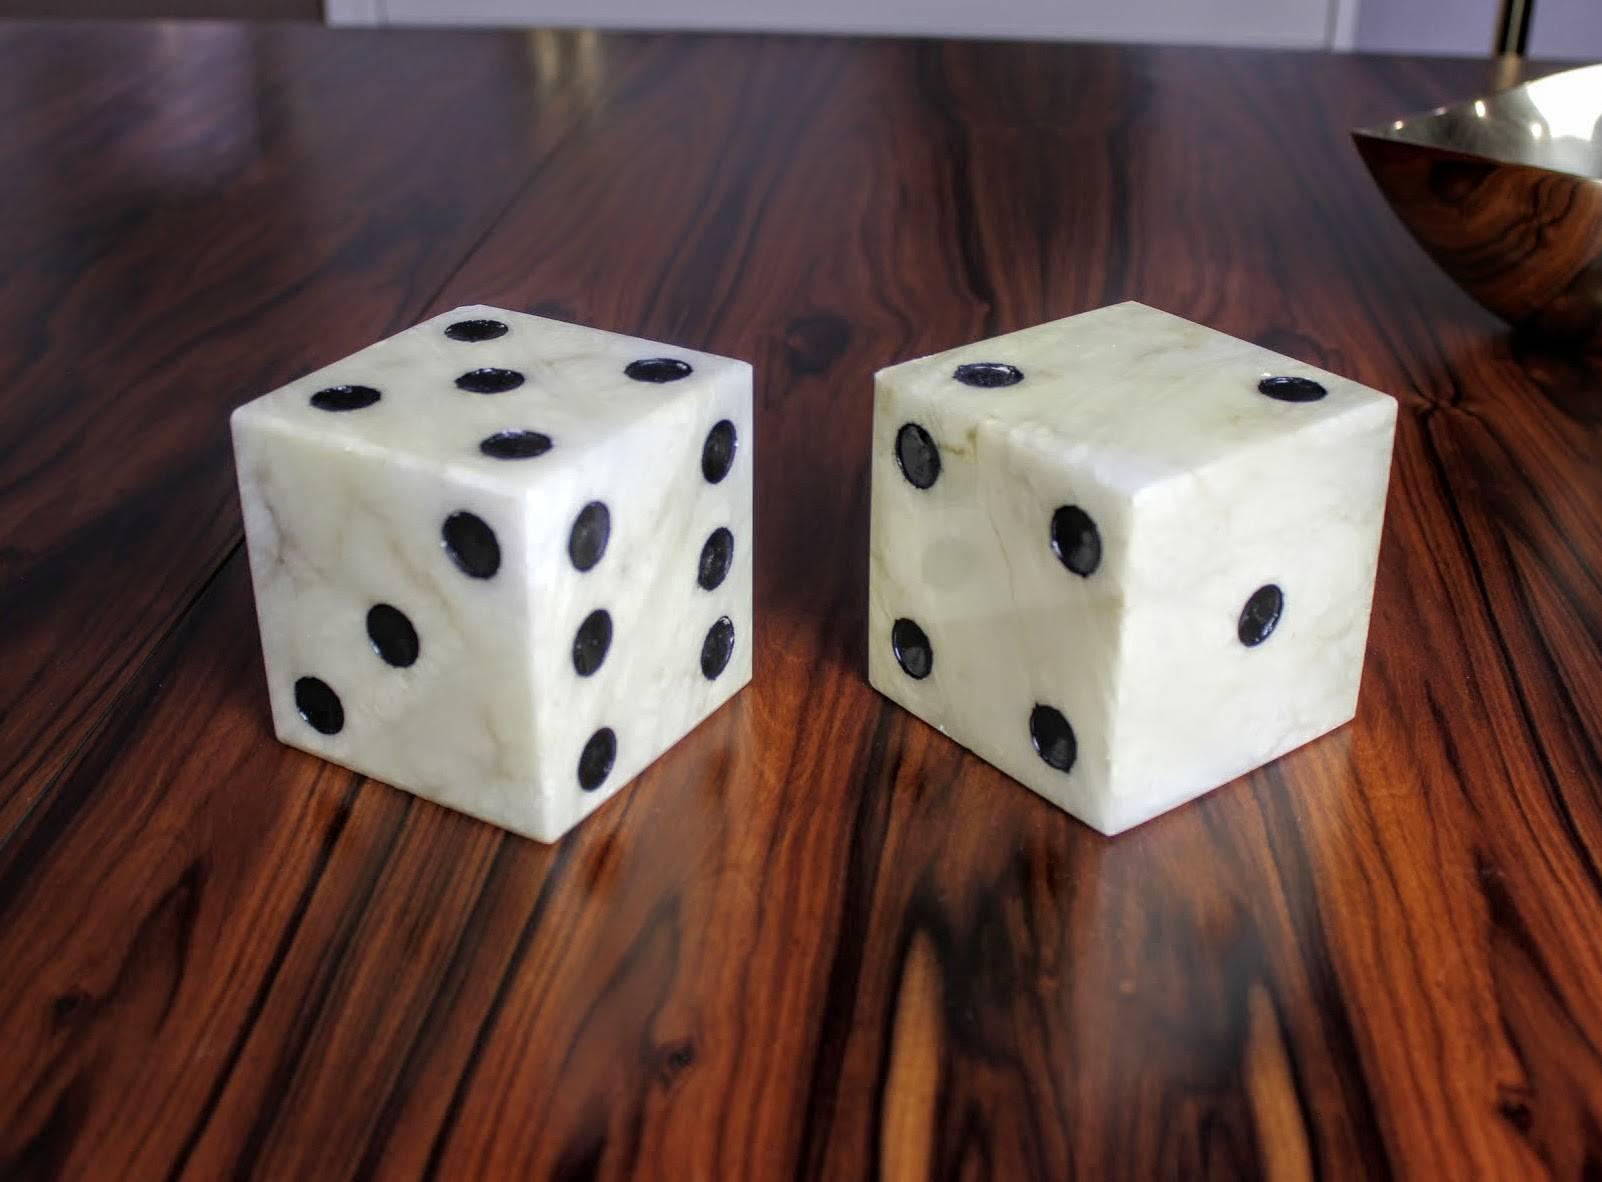 Huge marble dice bookends or table sculpture, Italy. Great pop art bookends and super heavy. Minor flaws and flea bites but overall excellent condition.

See this item in our private NYC showroom! Refine Limited is located in the heart of Chelsea